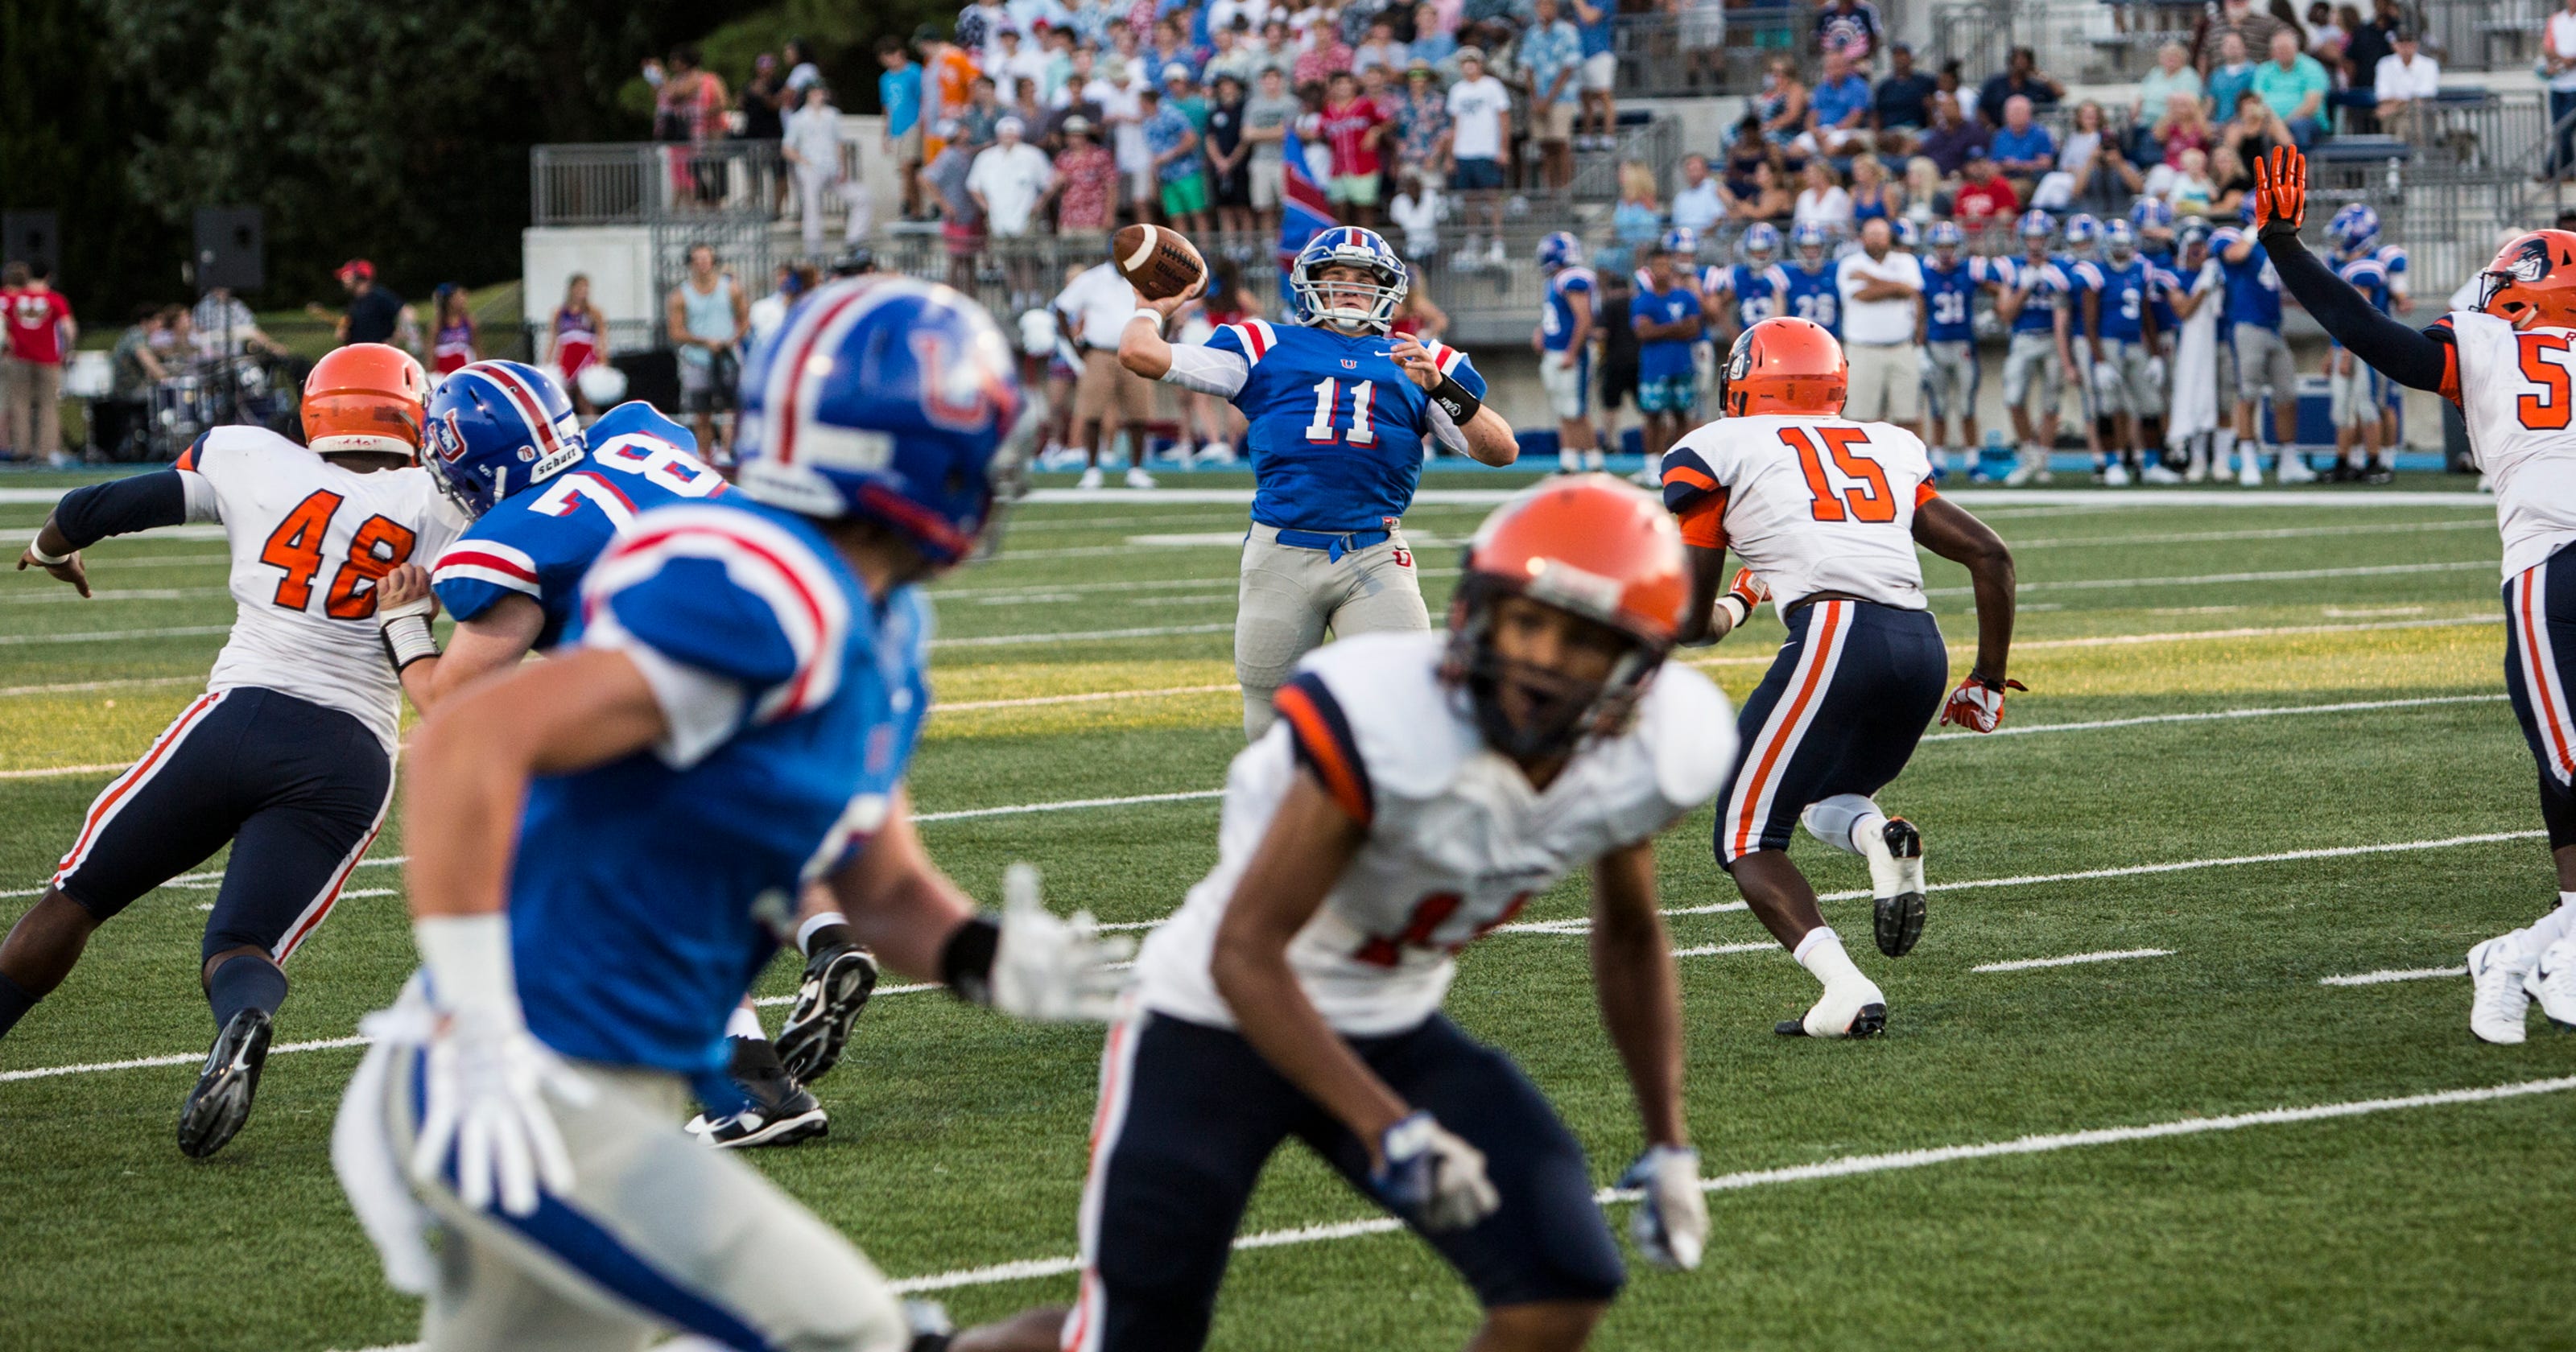 MUS football gets solid opening win over Ridgeway thanks to defense